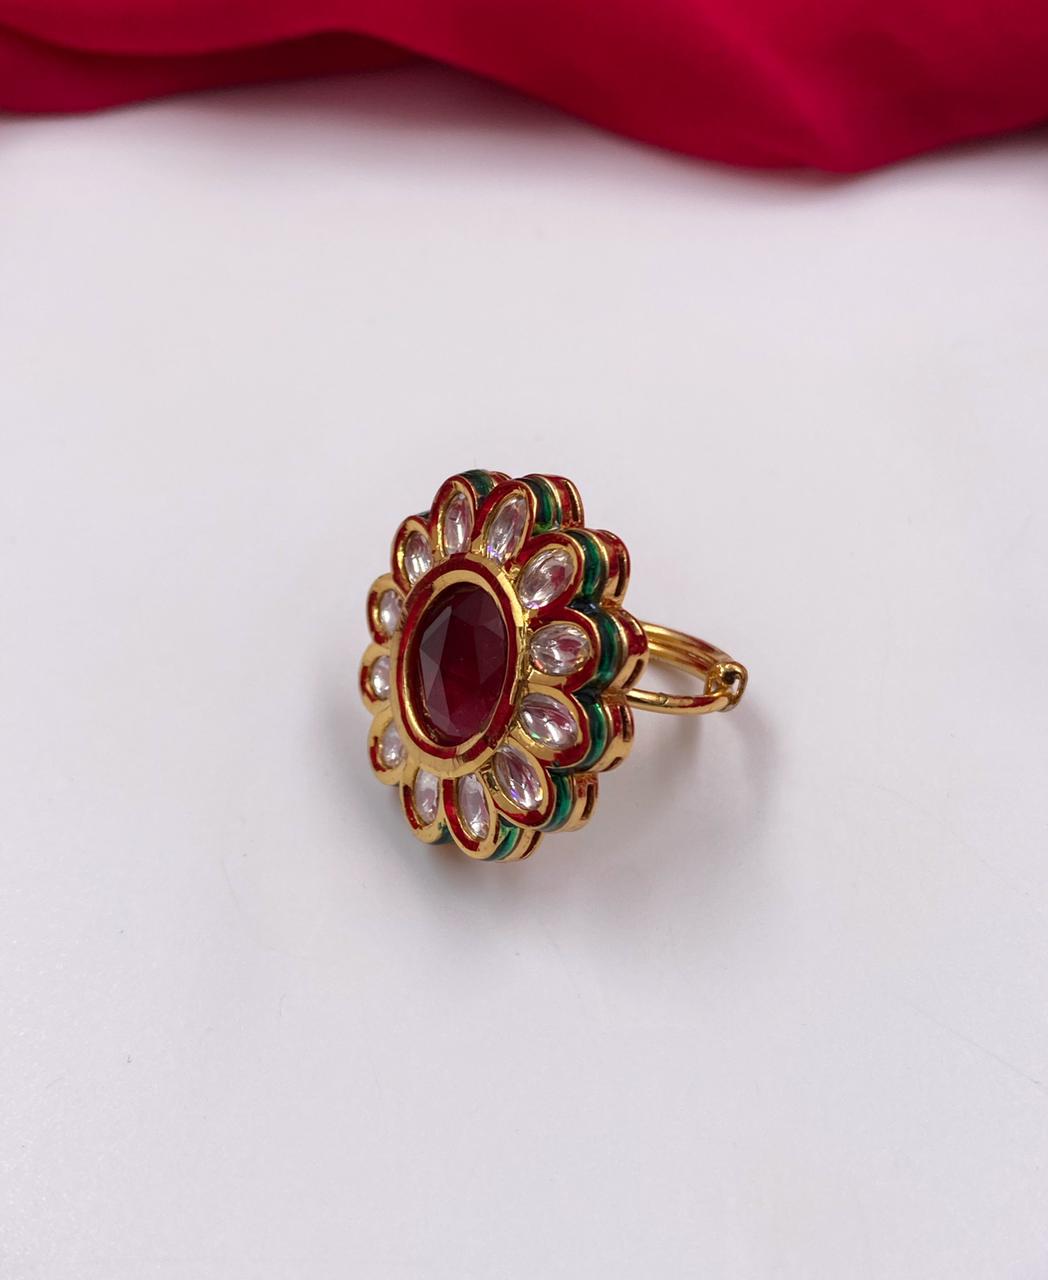 Indian Double Ring-Traditional Kundan Gold Plated Party Wear Ring With  Chain | eBay